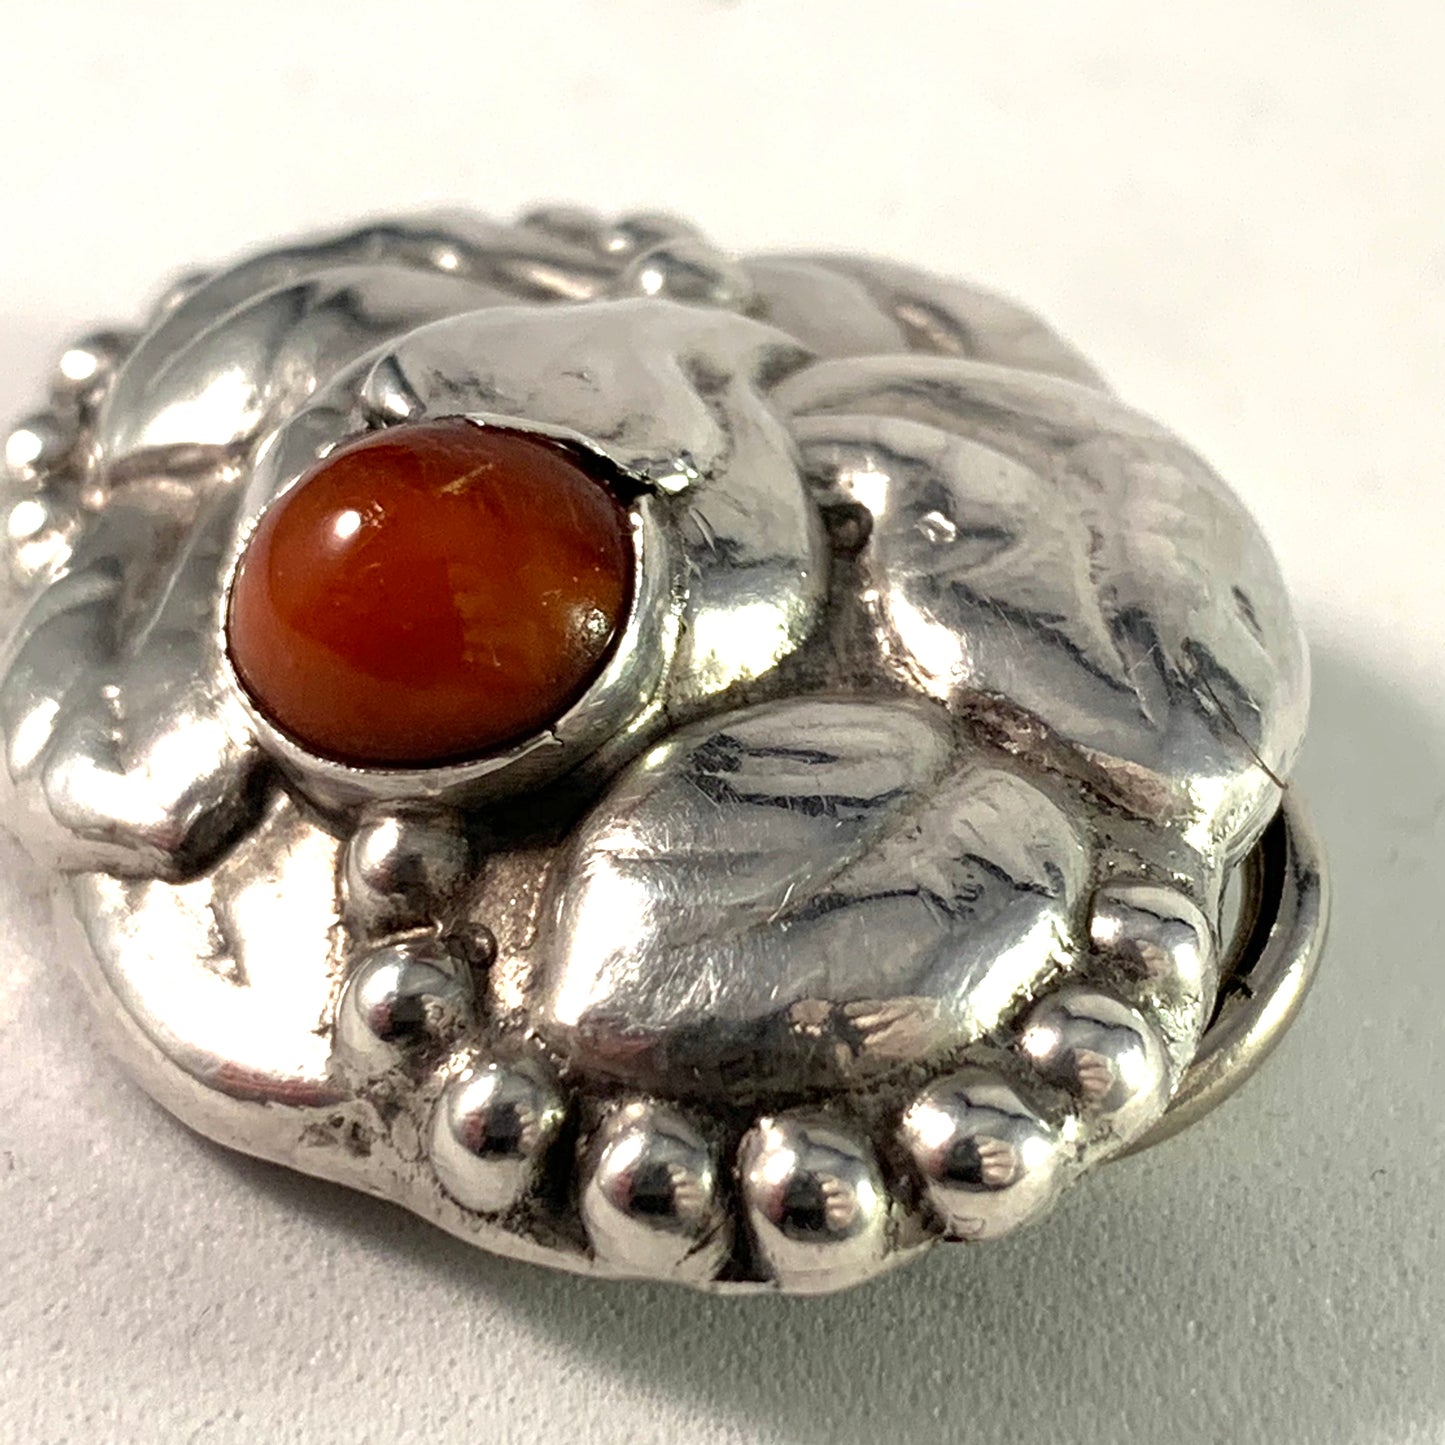 Denmark 1910s Art Nouveau Silver Amber Brooch Converted To Scarf Clip.